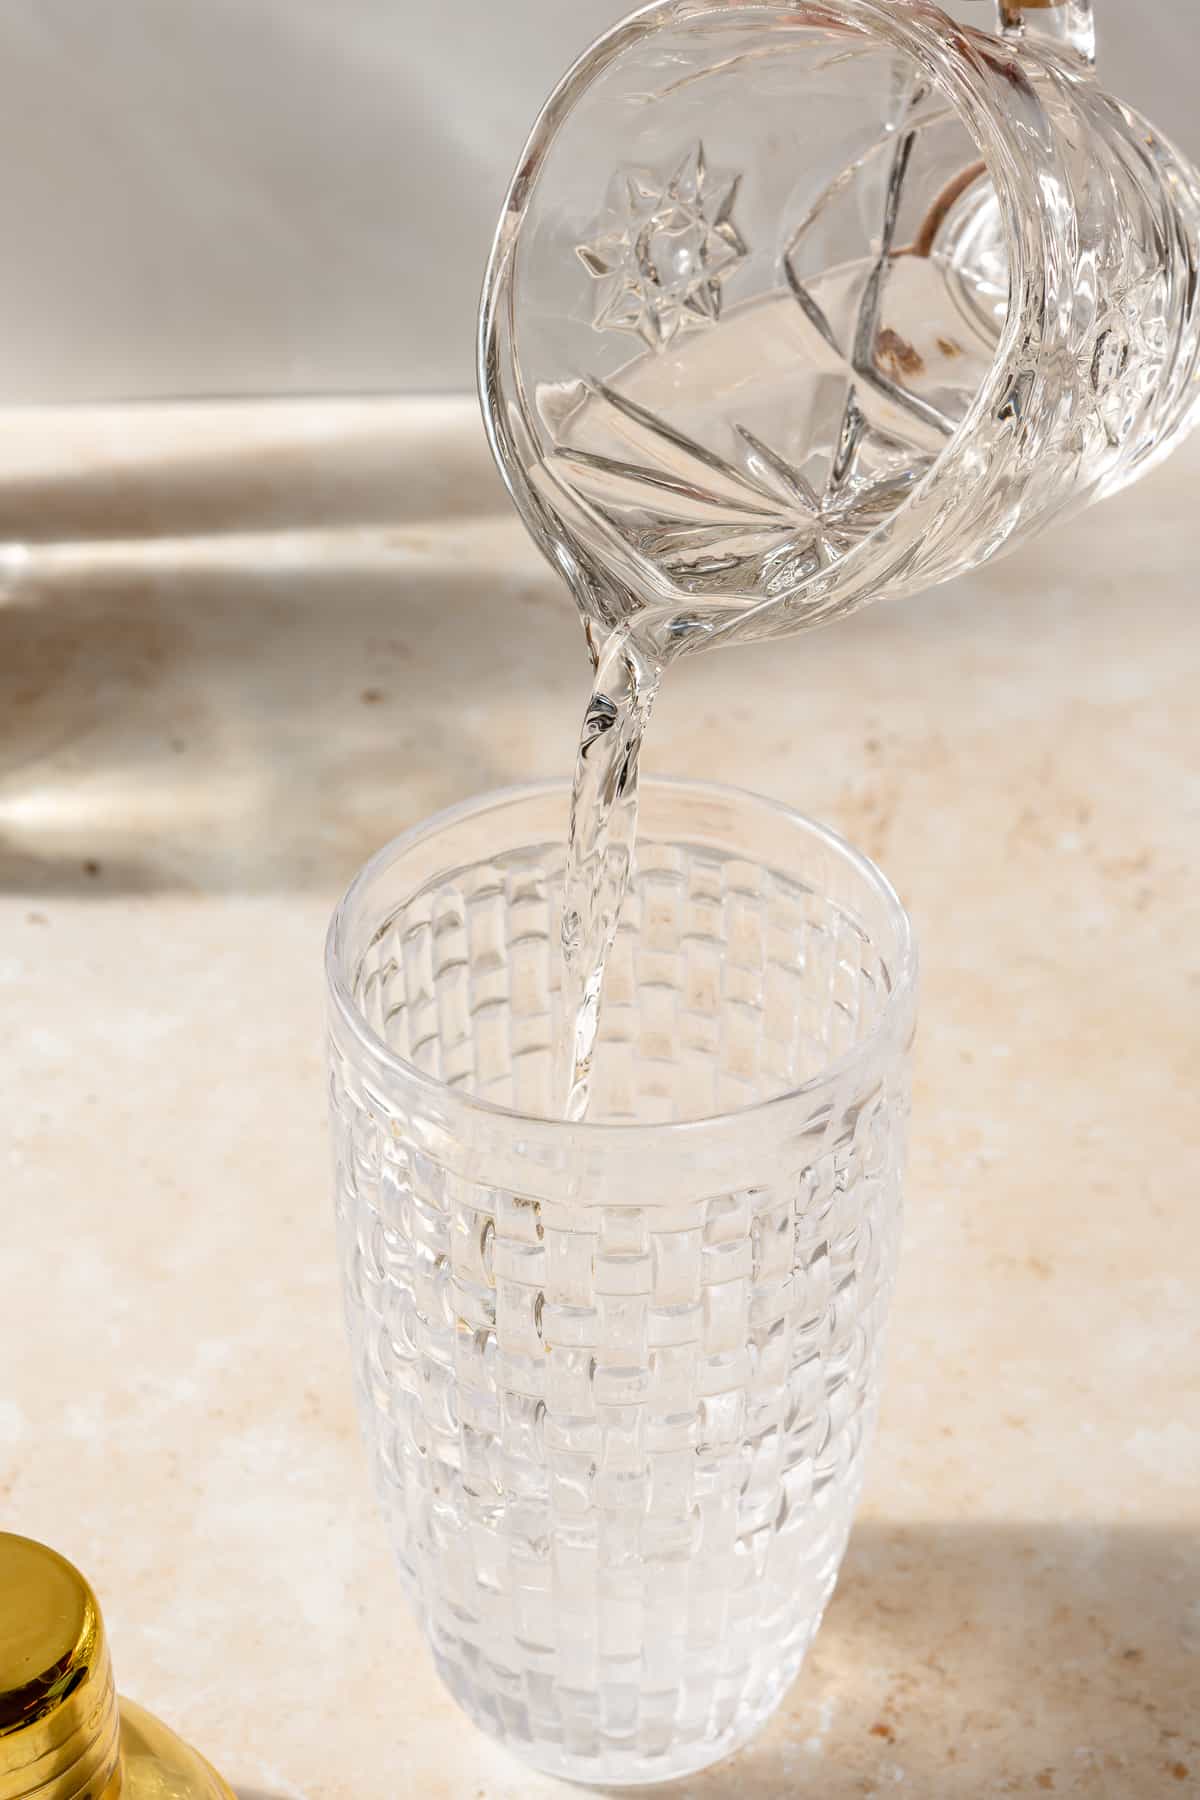 Vodka pouring into glass shaker.